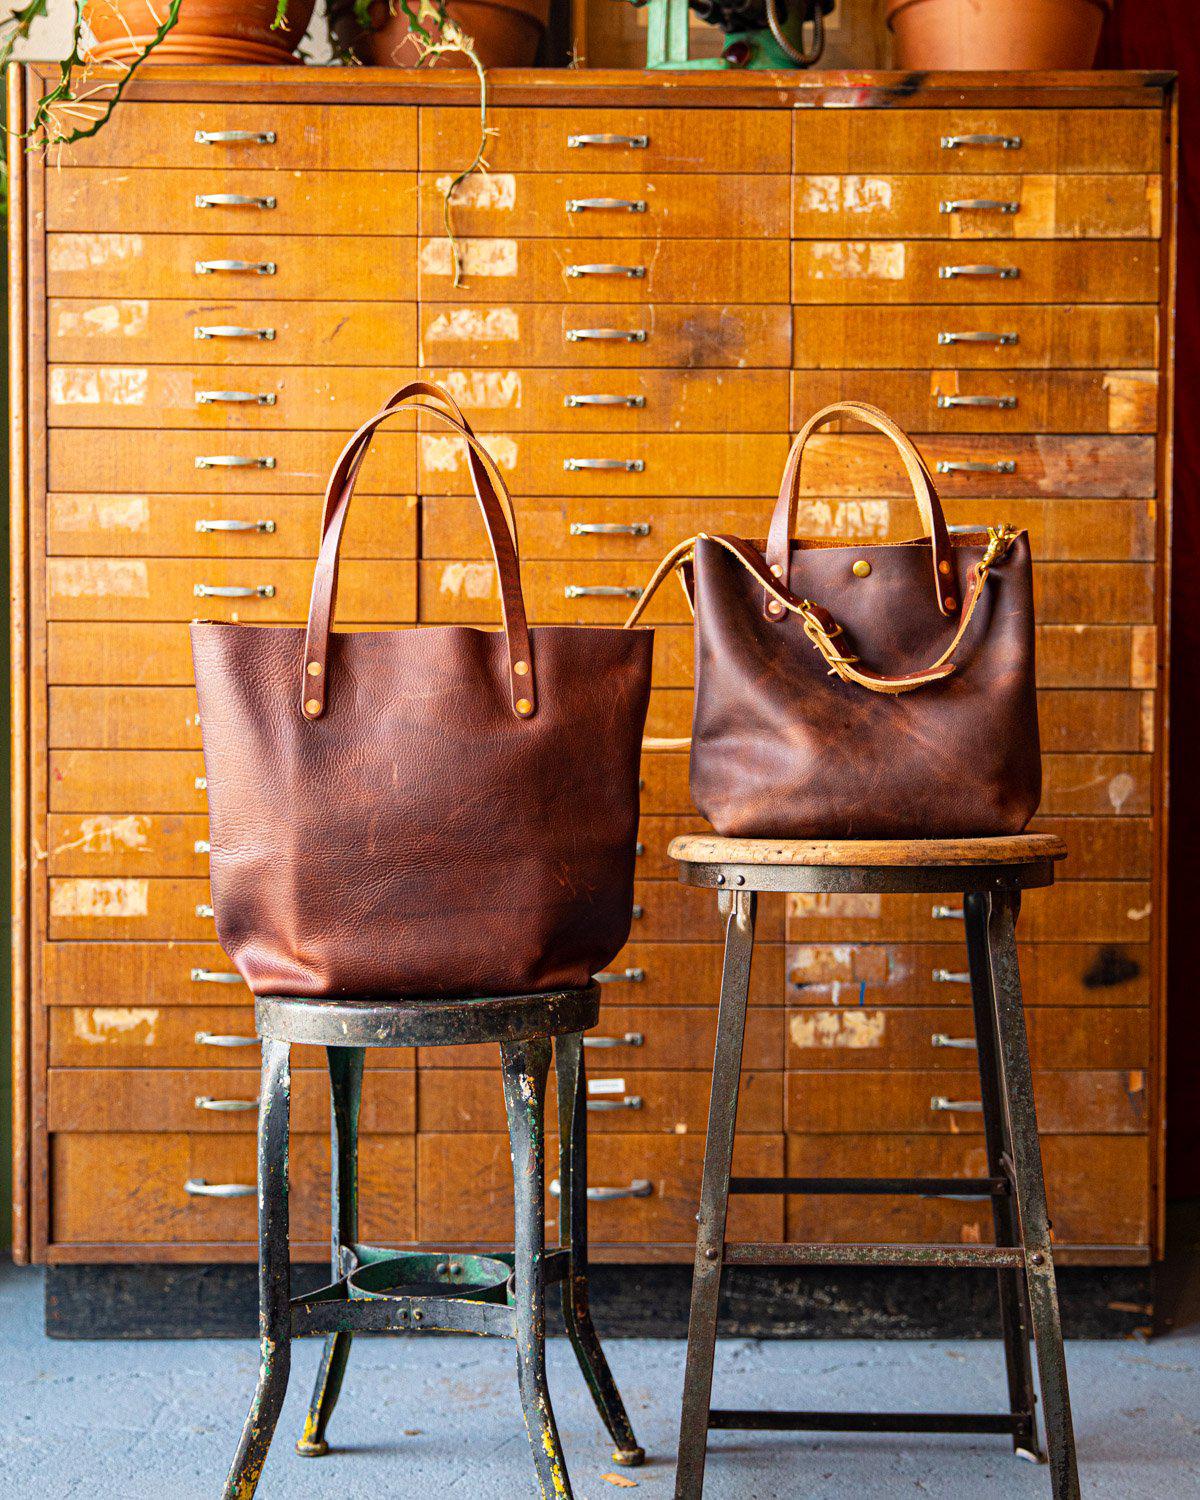 Mini Tote or Standard Tote? 🤔 Find the Perfect Leather Tote Bag